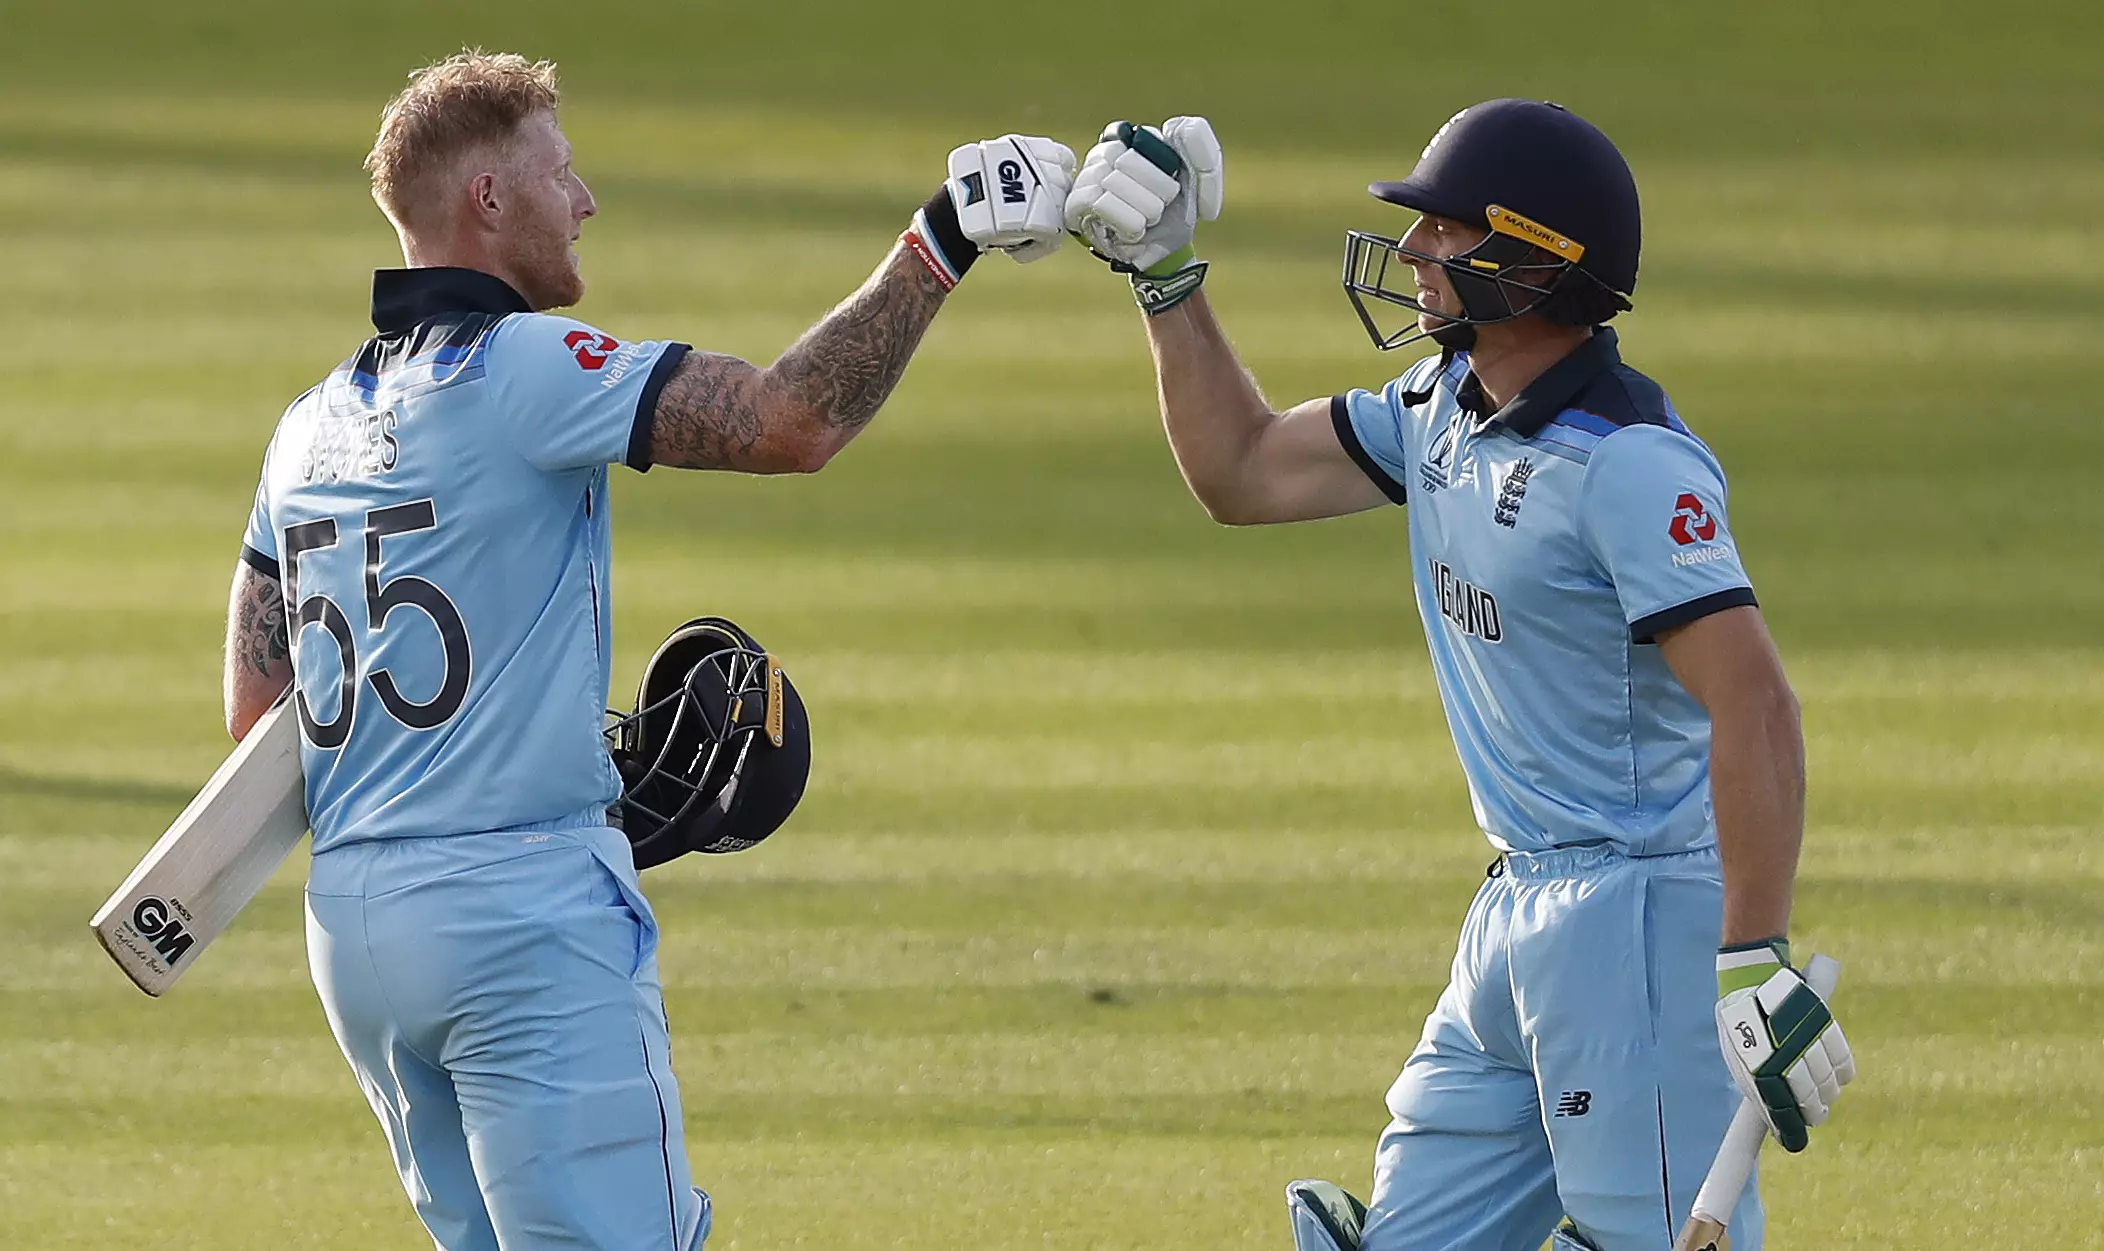 Stokes and Buttler were two of England's heroes. Image: PA Images